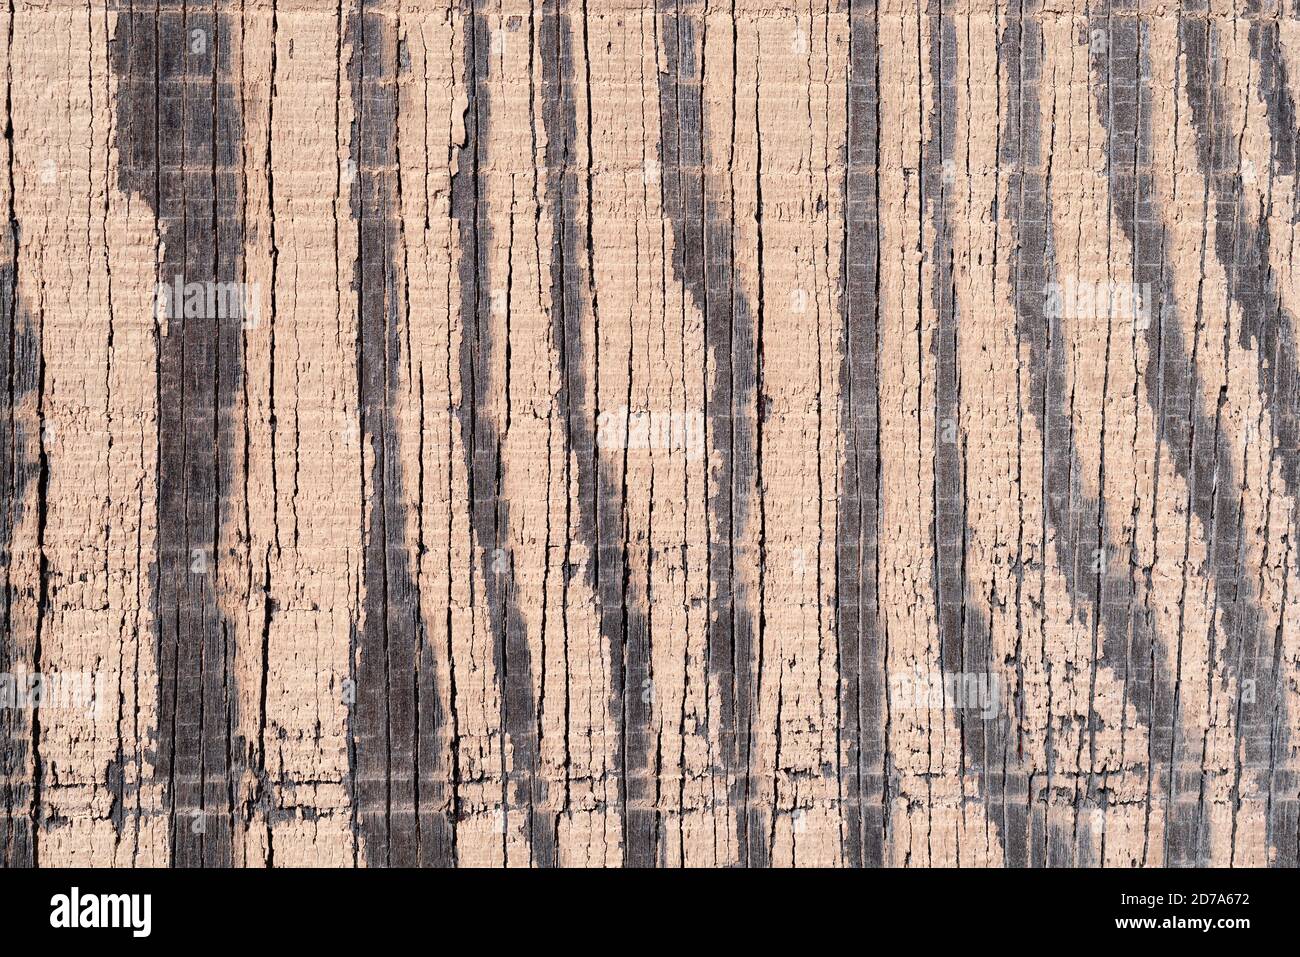 The surface of old exterior plywood with very faded paint showing wood and wear from weather. Stock Photo